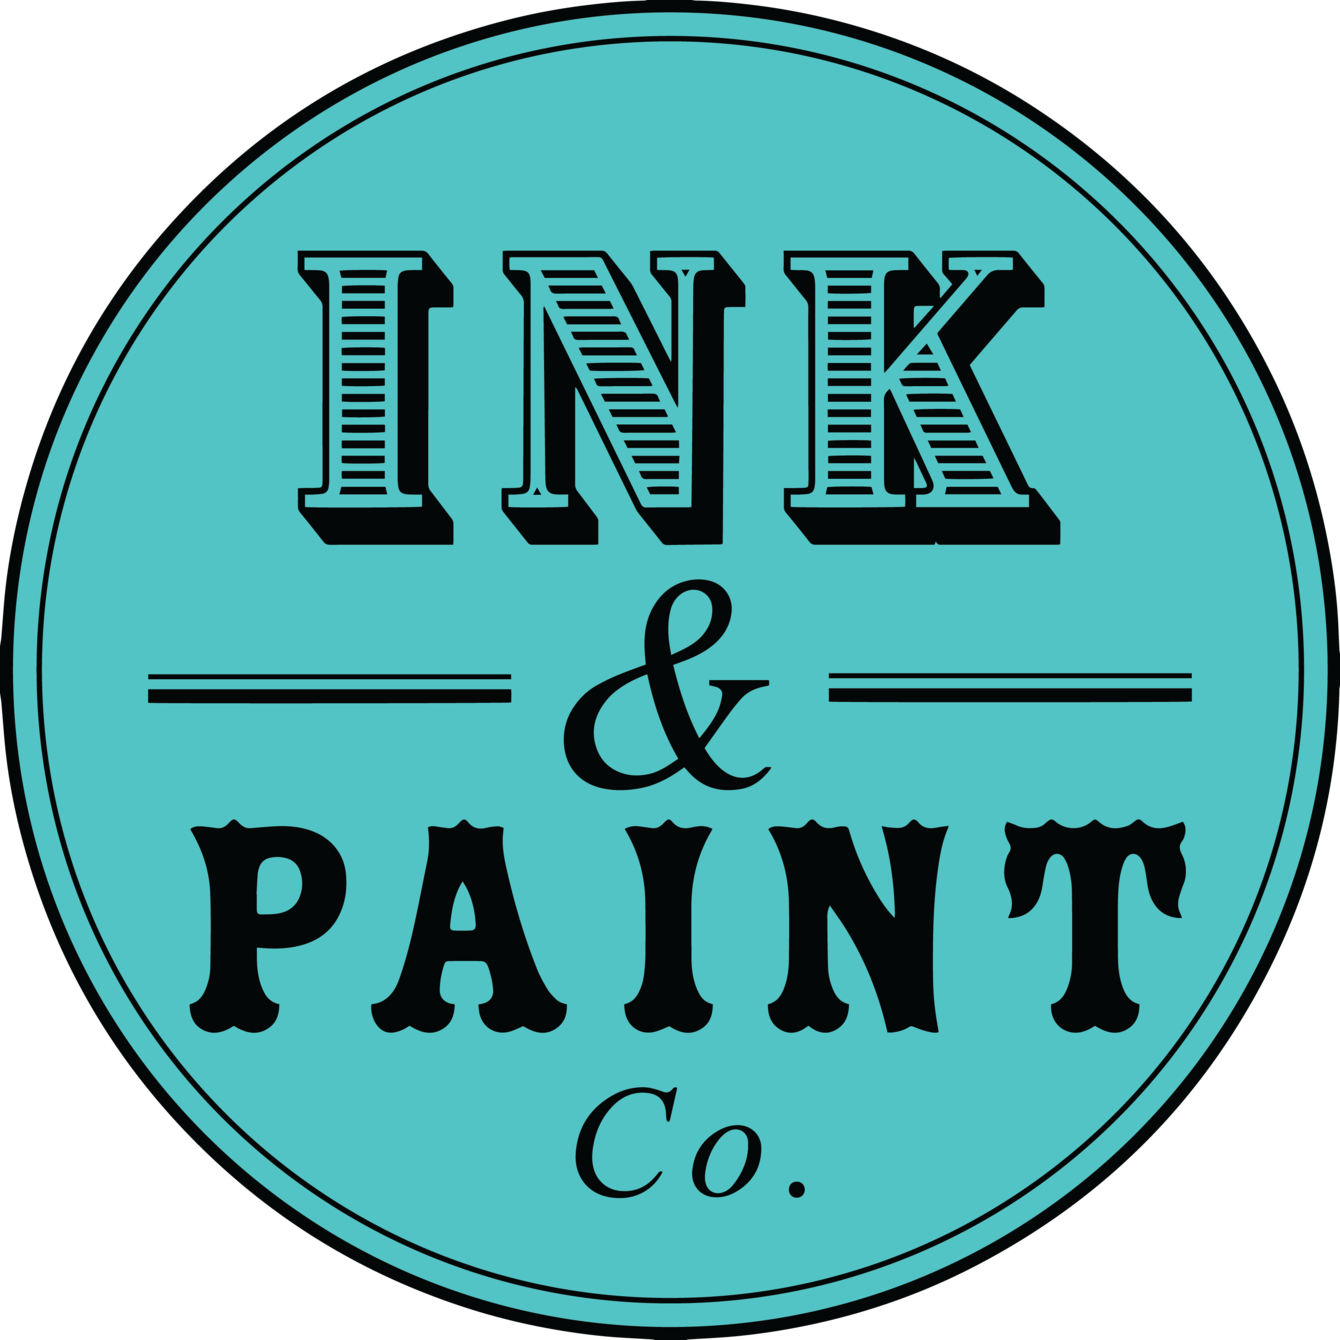 Ink & Paint Co - Infection Prevention And Control (1340x1340)